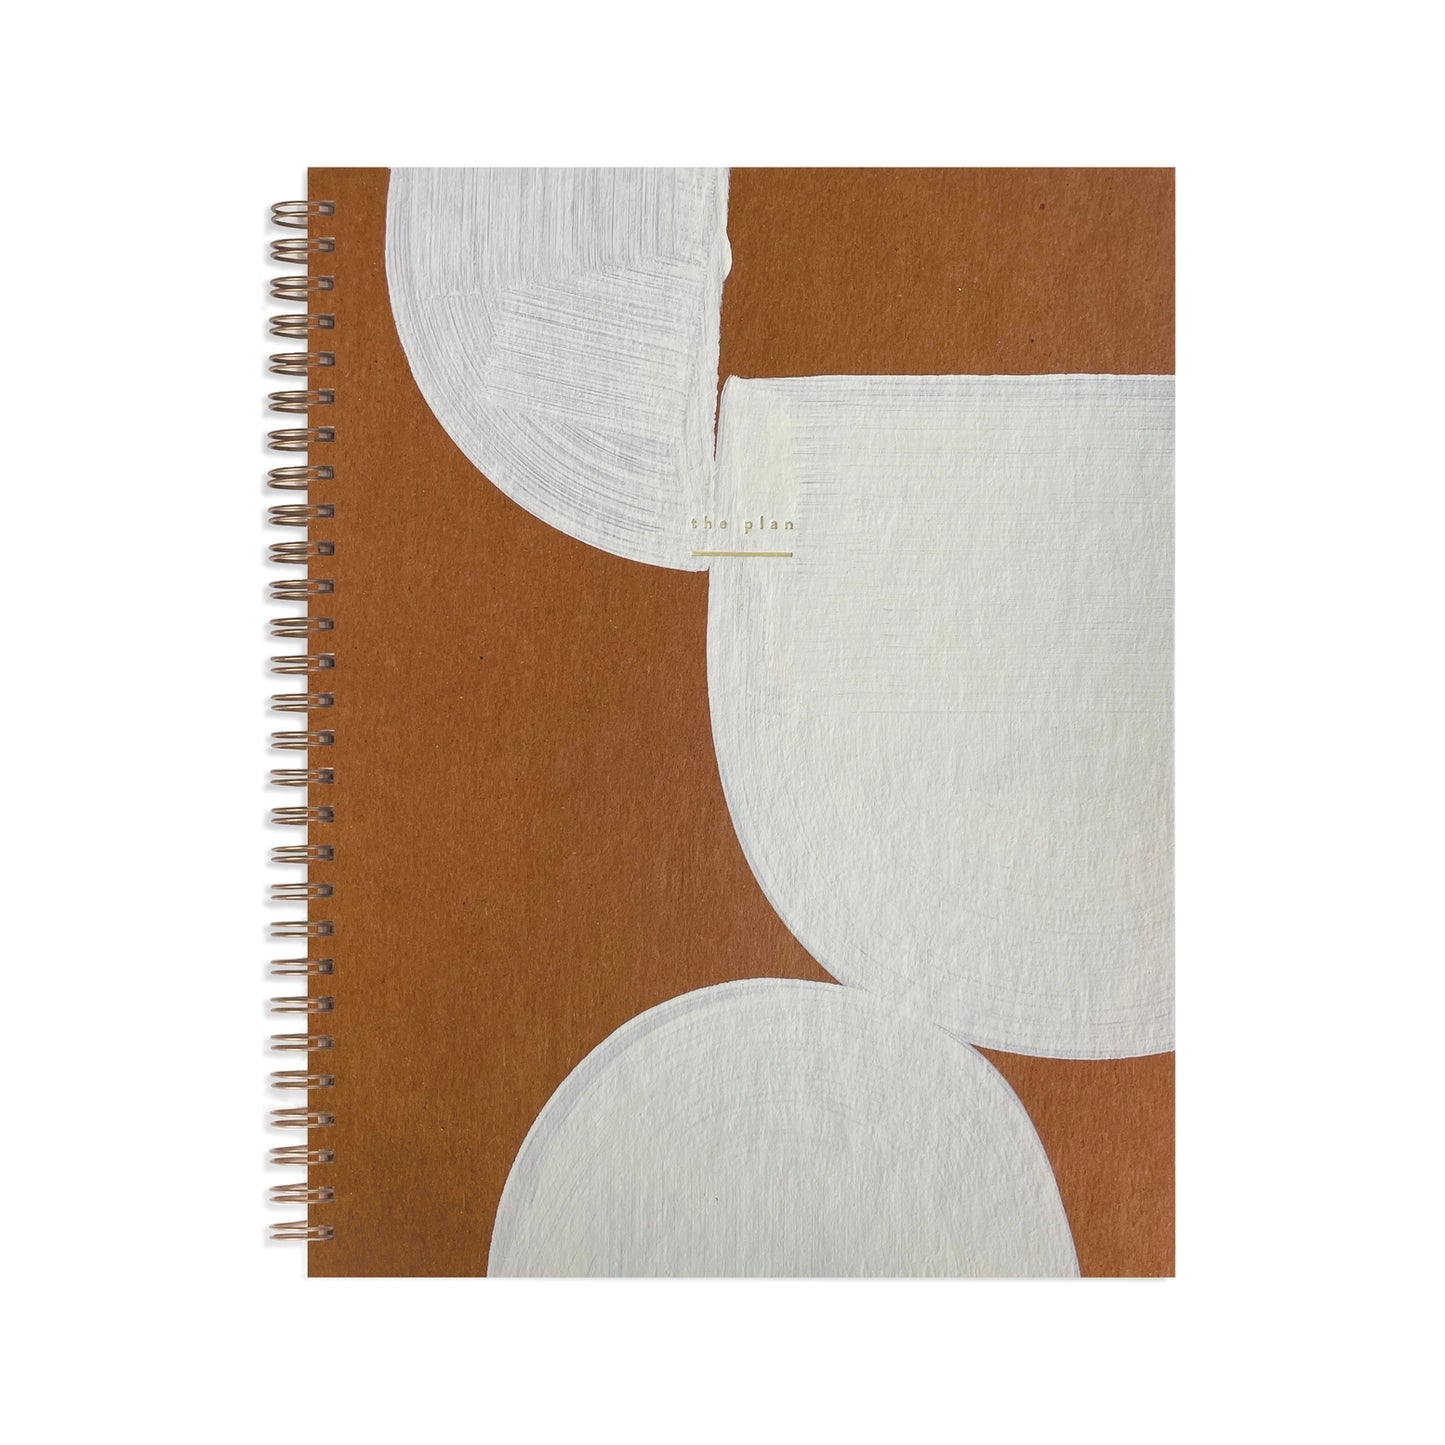 Hand painted notebooks in weekly undated planner style in brown and white